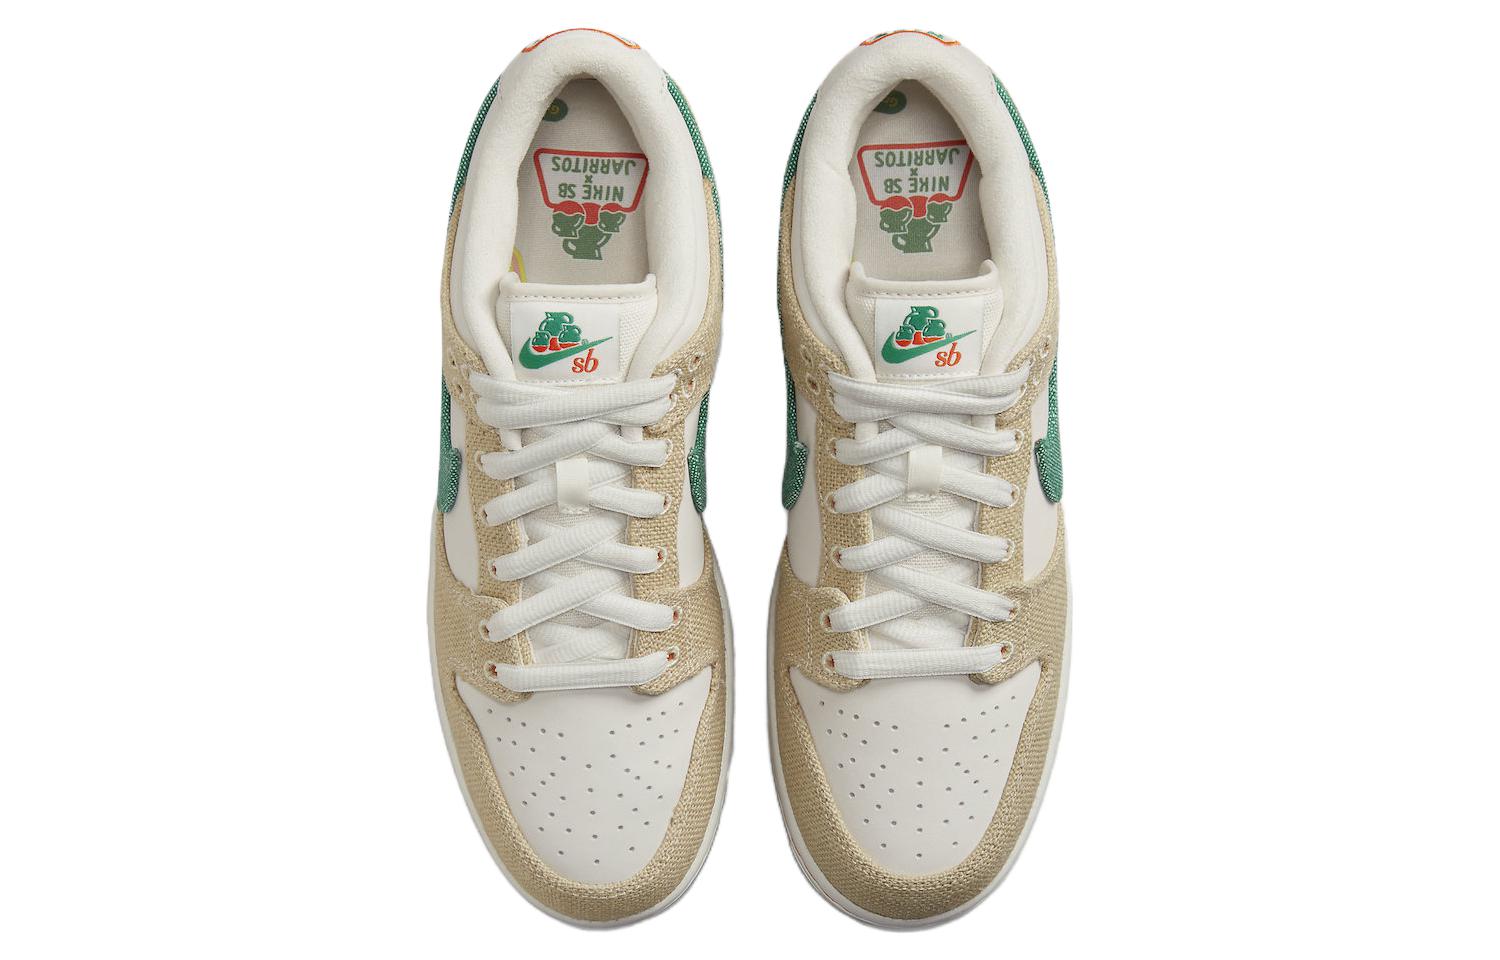 Nike SB Jarritos. Nike Jarritos. Jarritos x Nike SB Dunk Low.